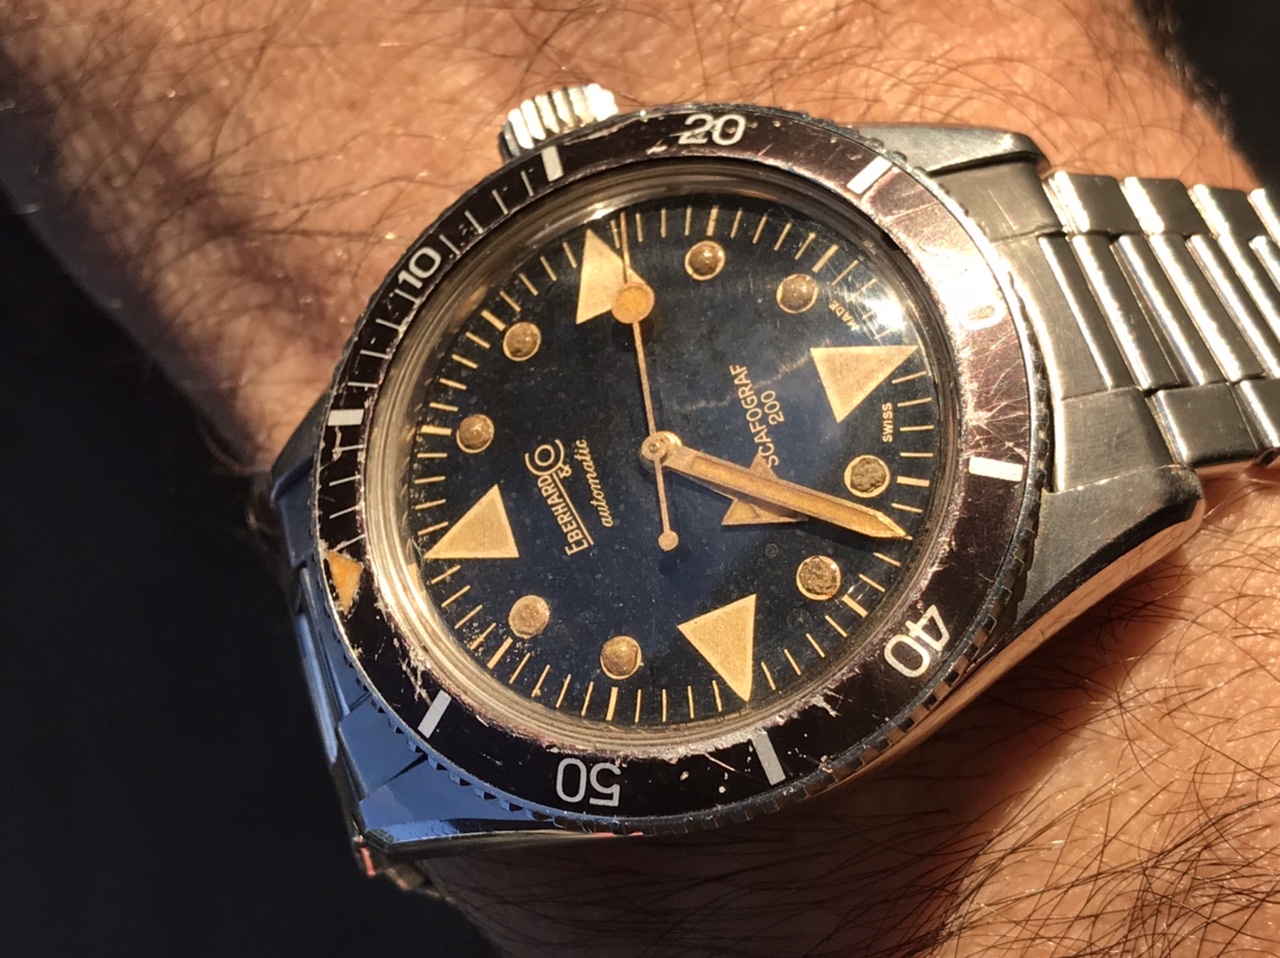 Owner Review: Eberhard Scafograf 200 – The iconic big crown